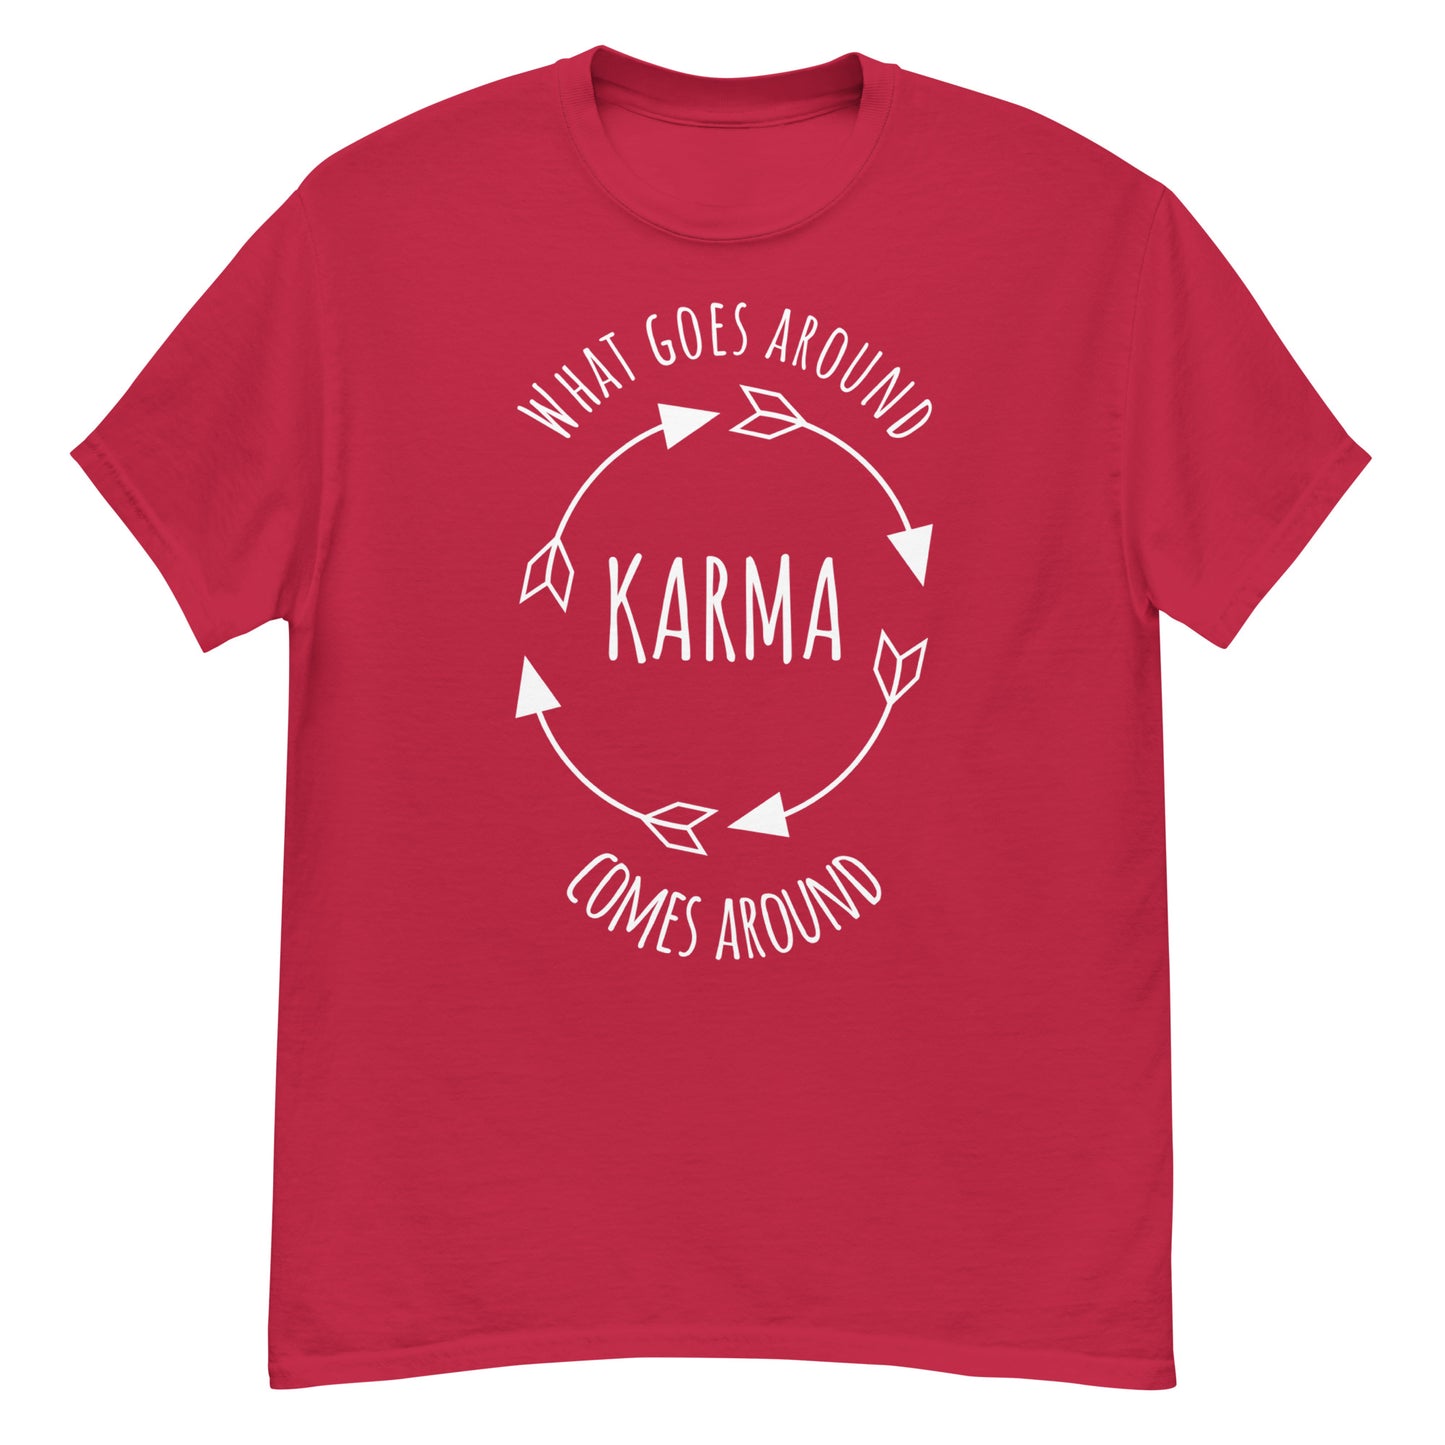 KARMA - What goes around comes around - classic tee (white lettering)